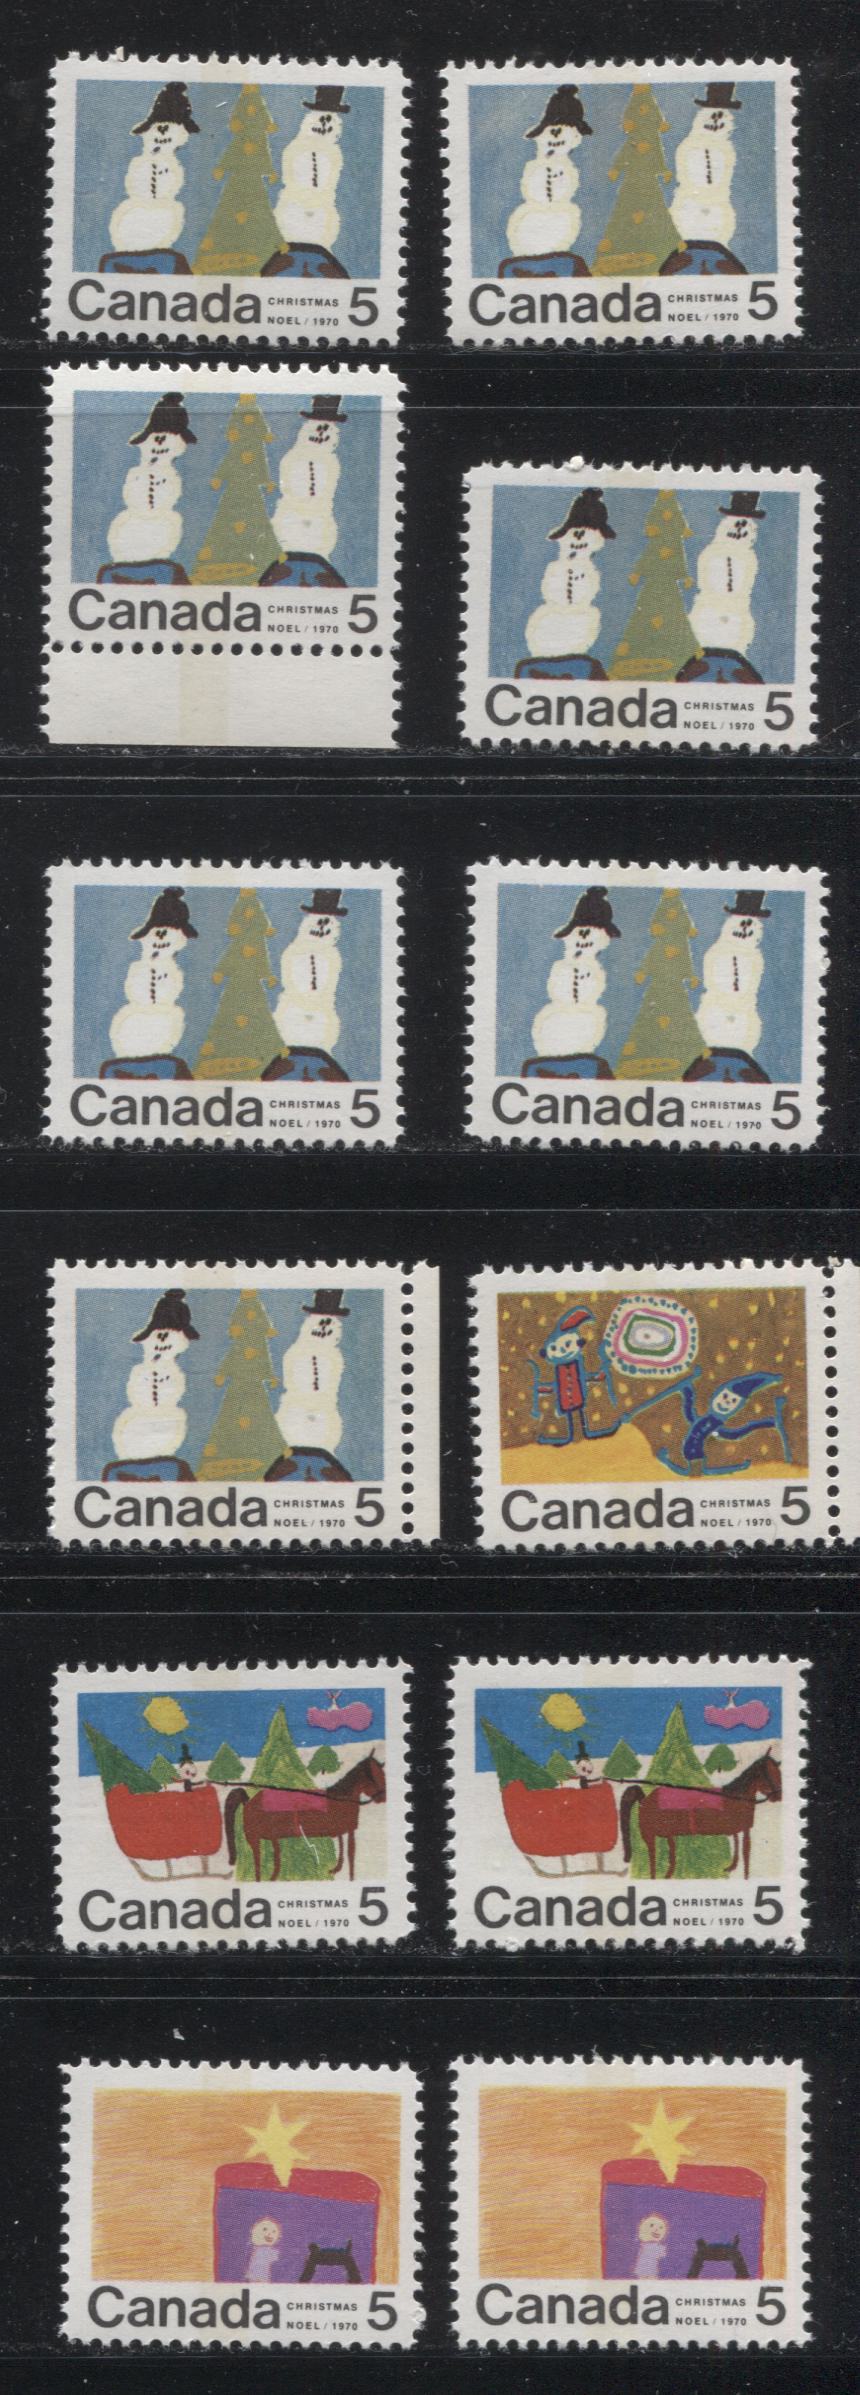 Lot 147 Canada #519p/523p 5c Multicoloured 1970 Christmas Issue, A Complete Set of 12 Winnipeg Tagged Constant Plate Varieties From Combination 1, Ribbed HB11 Paper, Perf. 11.9 x 11.95